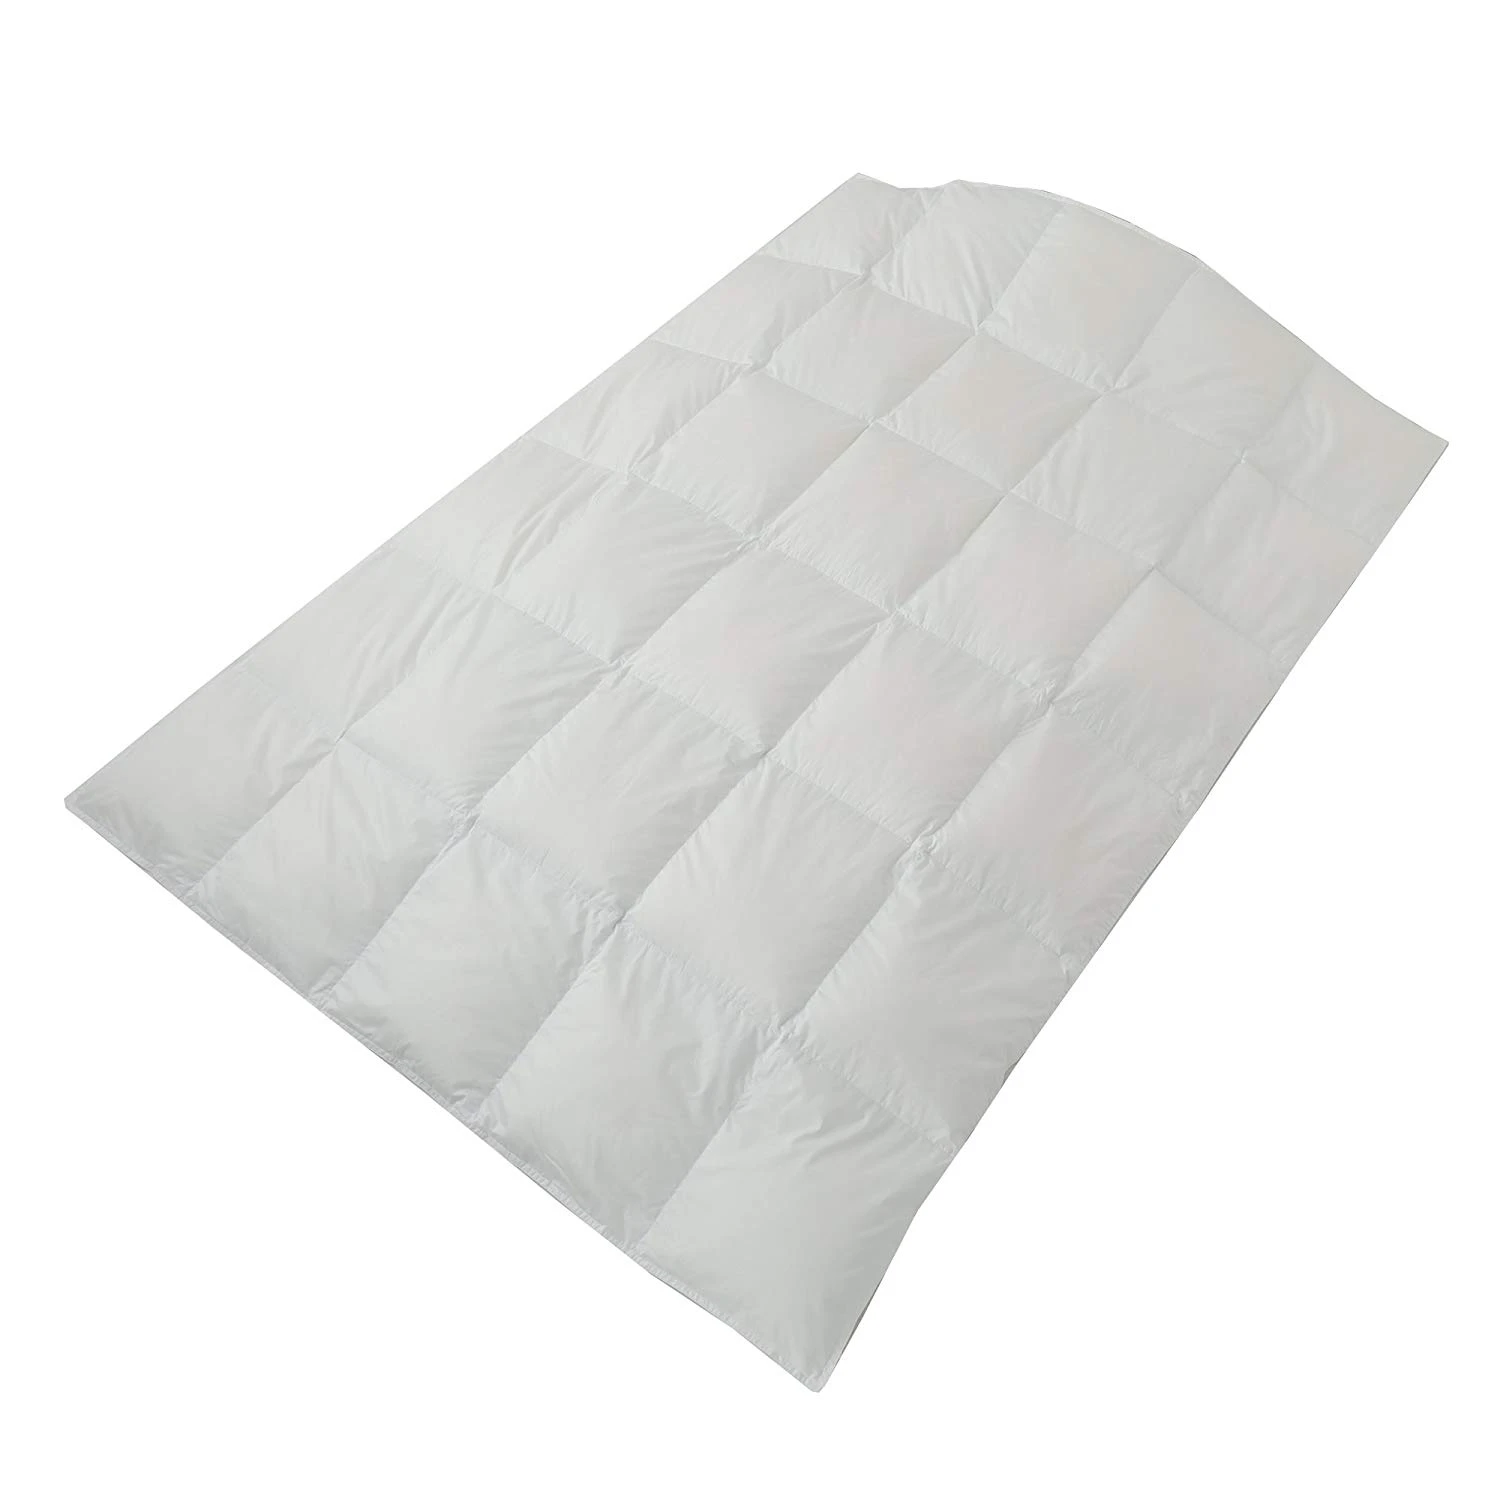 Wholesale All-season Goose Down Duvet 100% Cotton Cover High Quality Hotel Quilted Soft Comforter  Home Duvet Insert